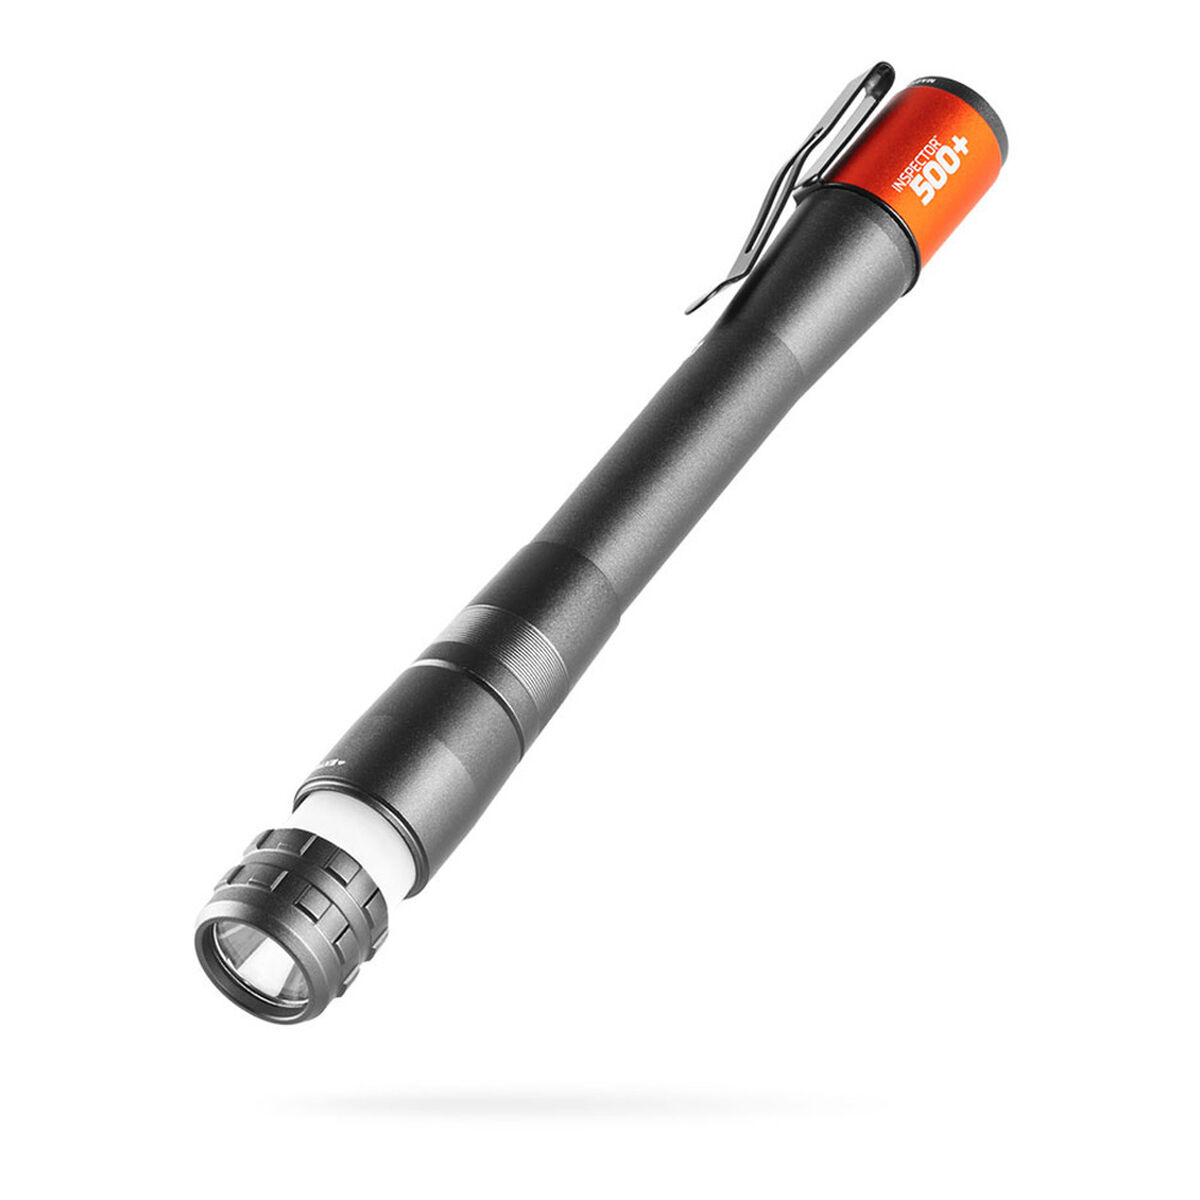 Torche LED rechargeable Nebo Inspector™ 500+ Flexpower 500 lm Crayon